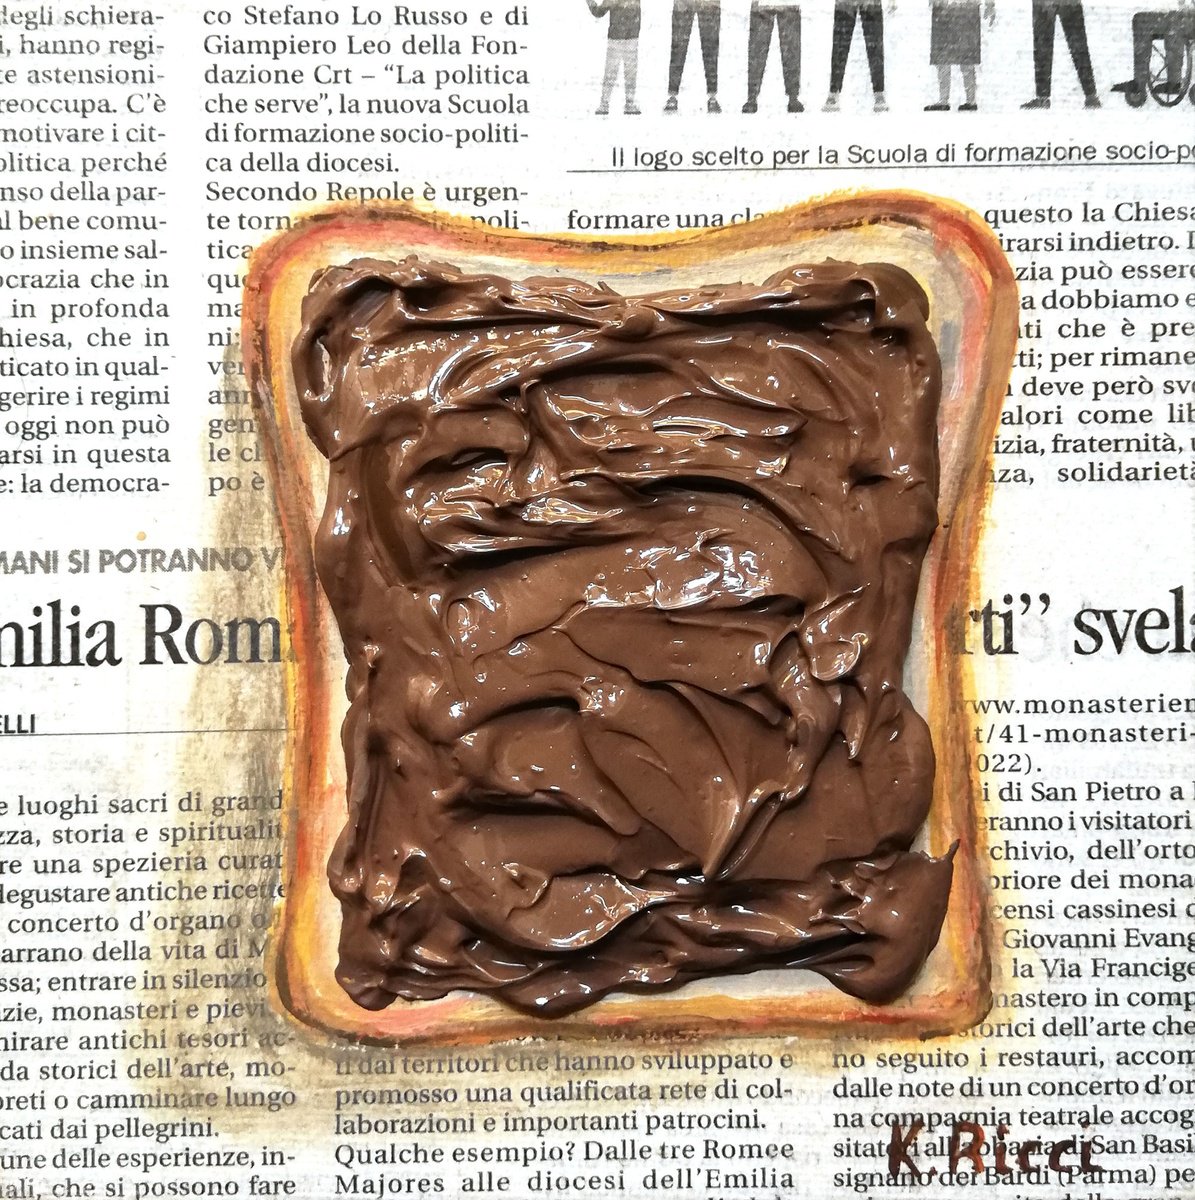 Toast with Nutella Original Acrylic on Canvas Board Painting 6 by 6 inches (15x15 cm) by Katia Ricci